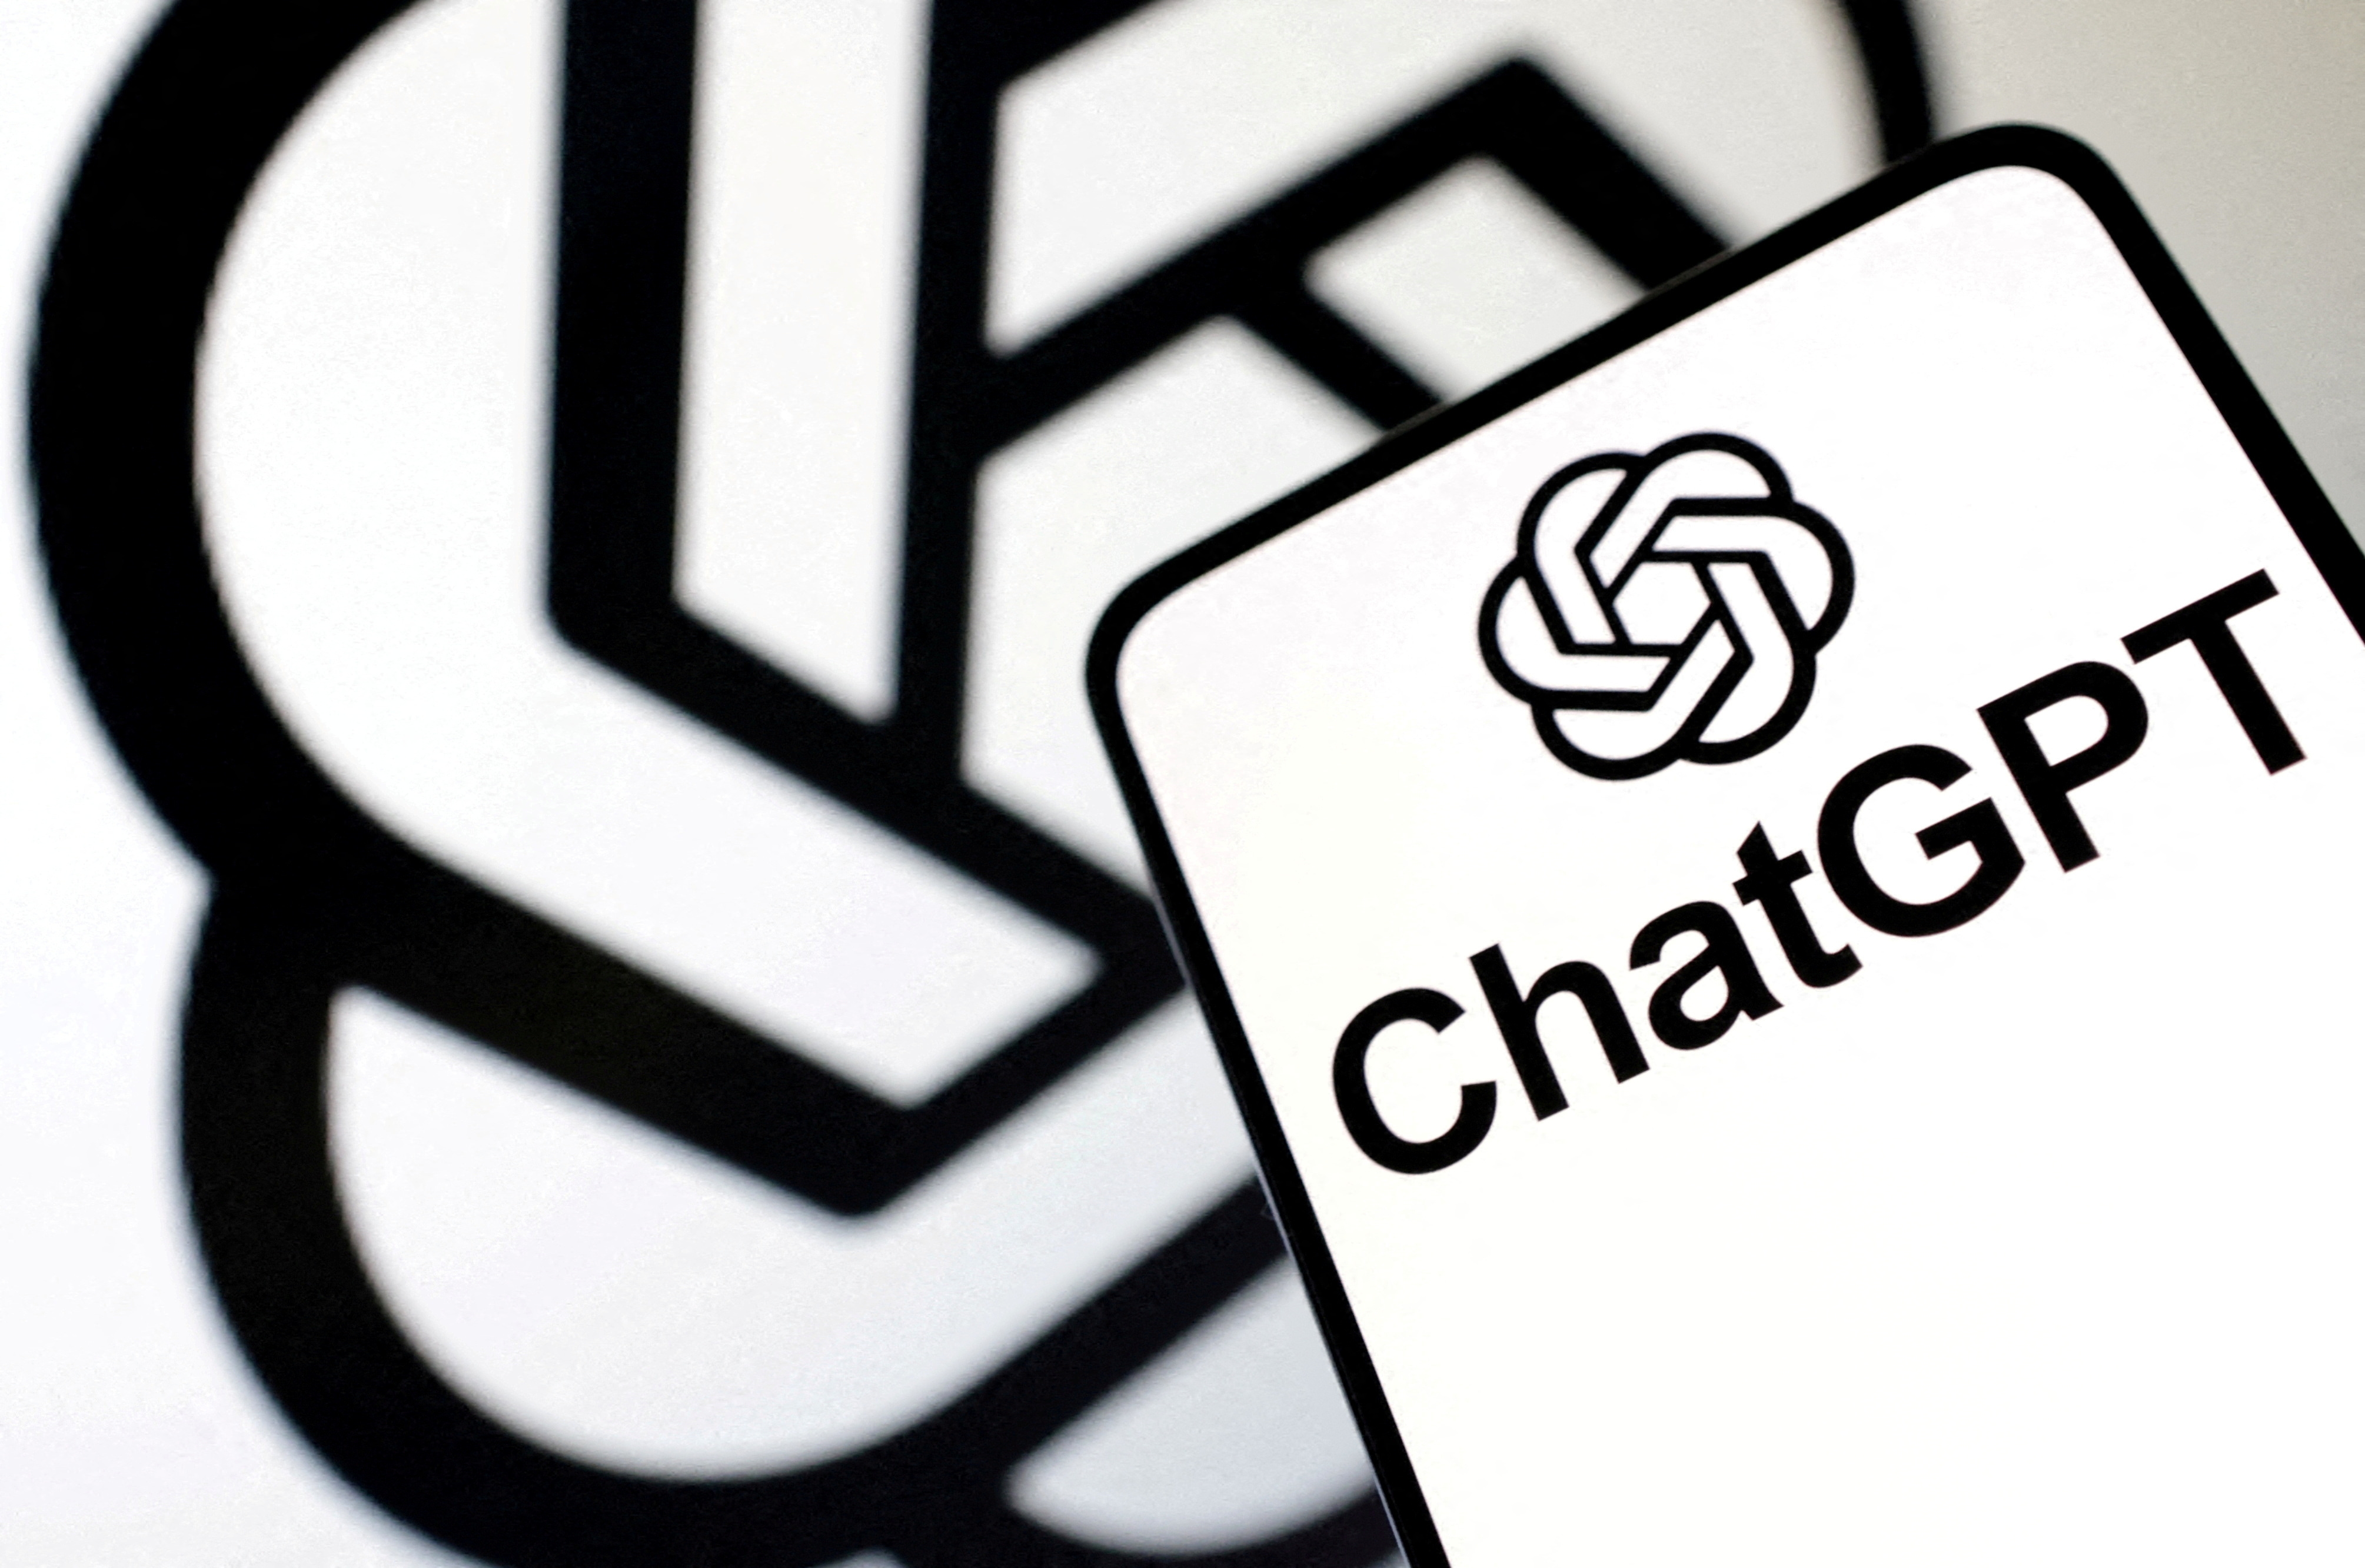 Italy restores ChatGPT after OpenAI responds to regulator | Reuters